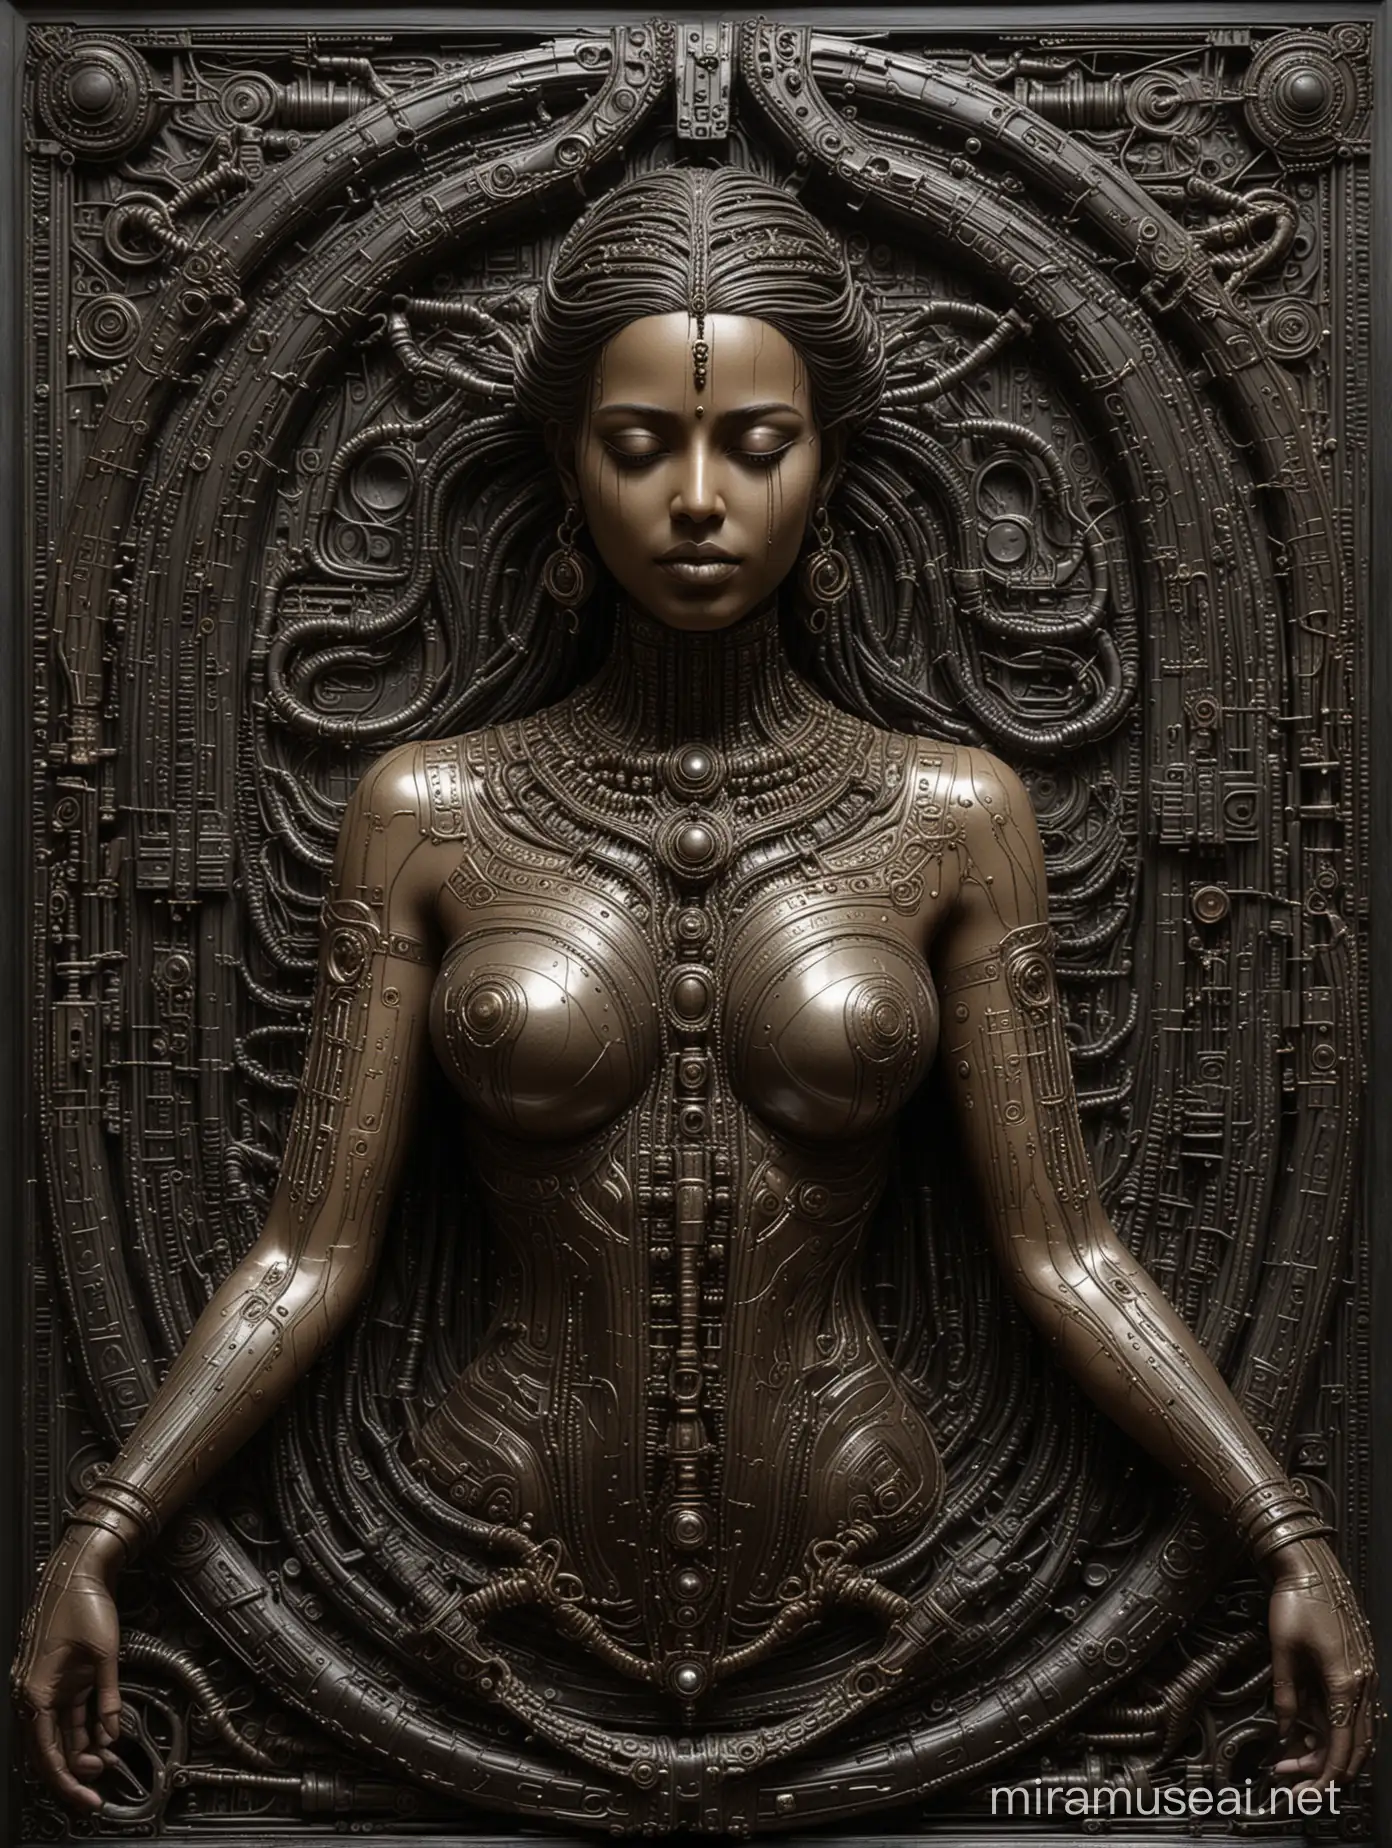 hr giger style "Mangala Tanjore Paintings" with metallic skin and electric circuits under the skin